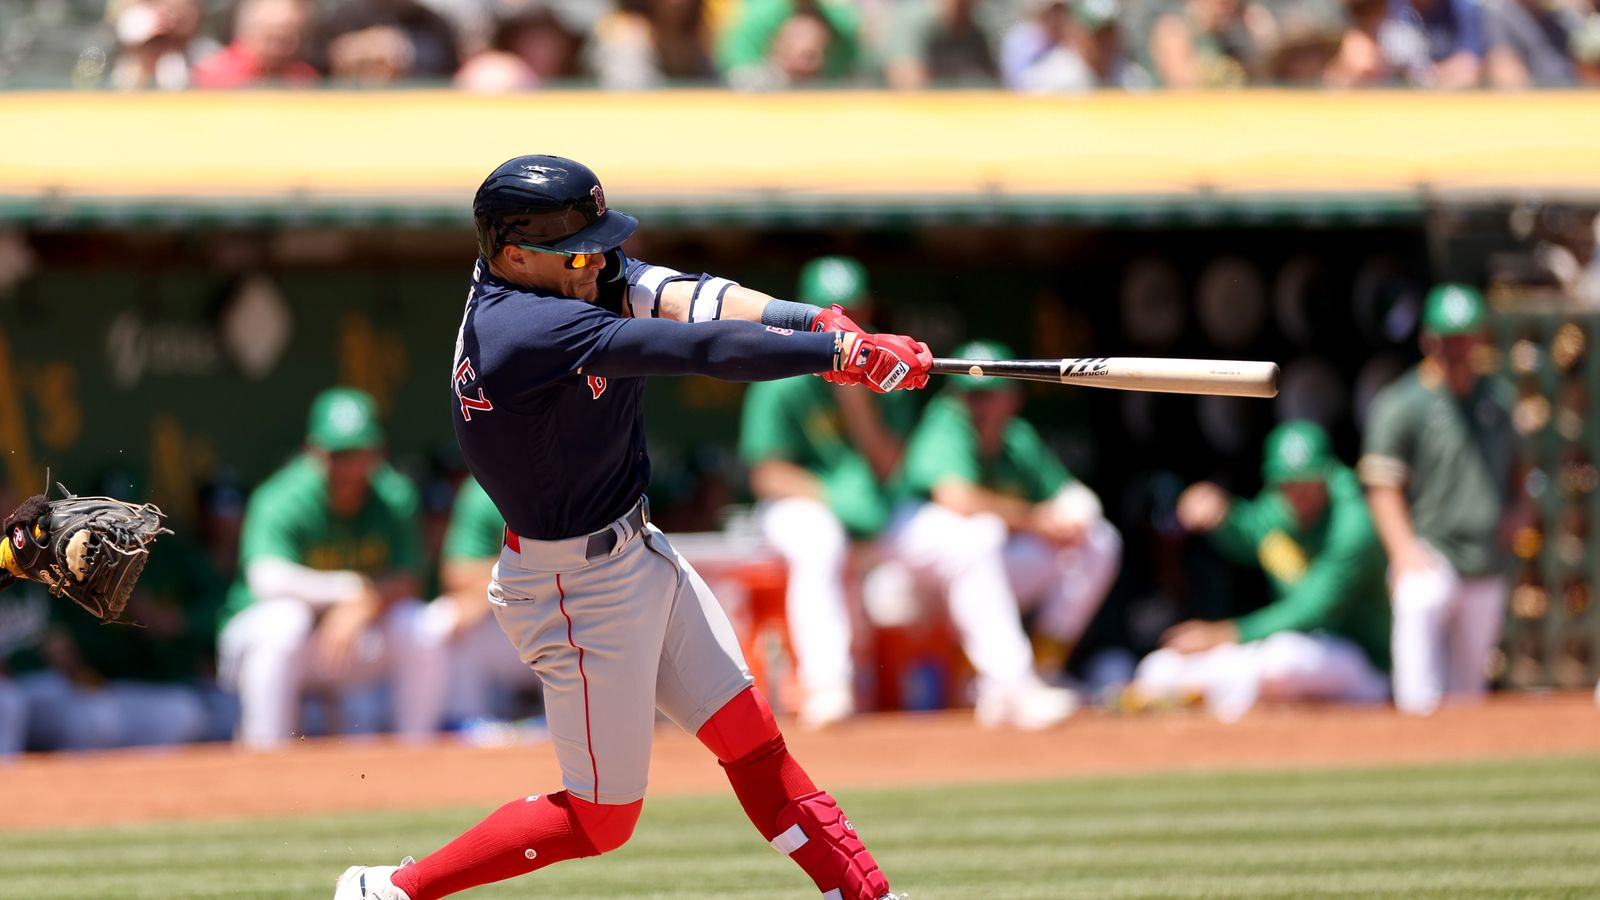 BSJ Live Coverage: Red Sox vs. Braves, 7:10 p.m. - Bello looks to